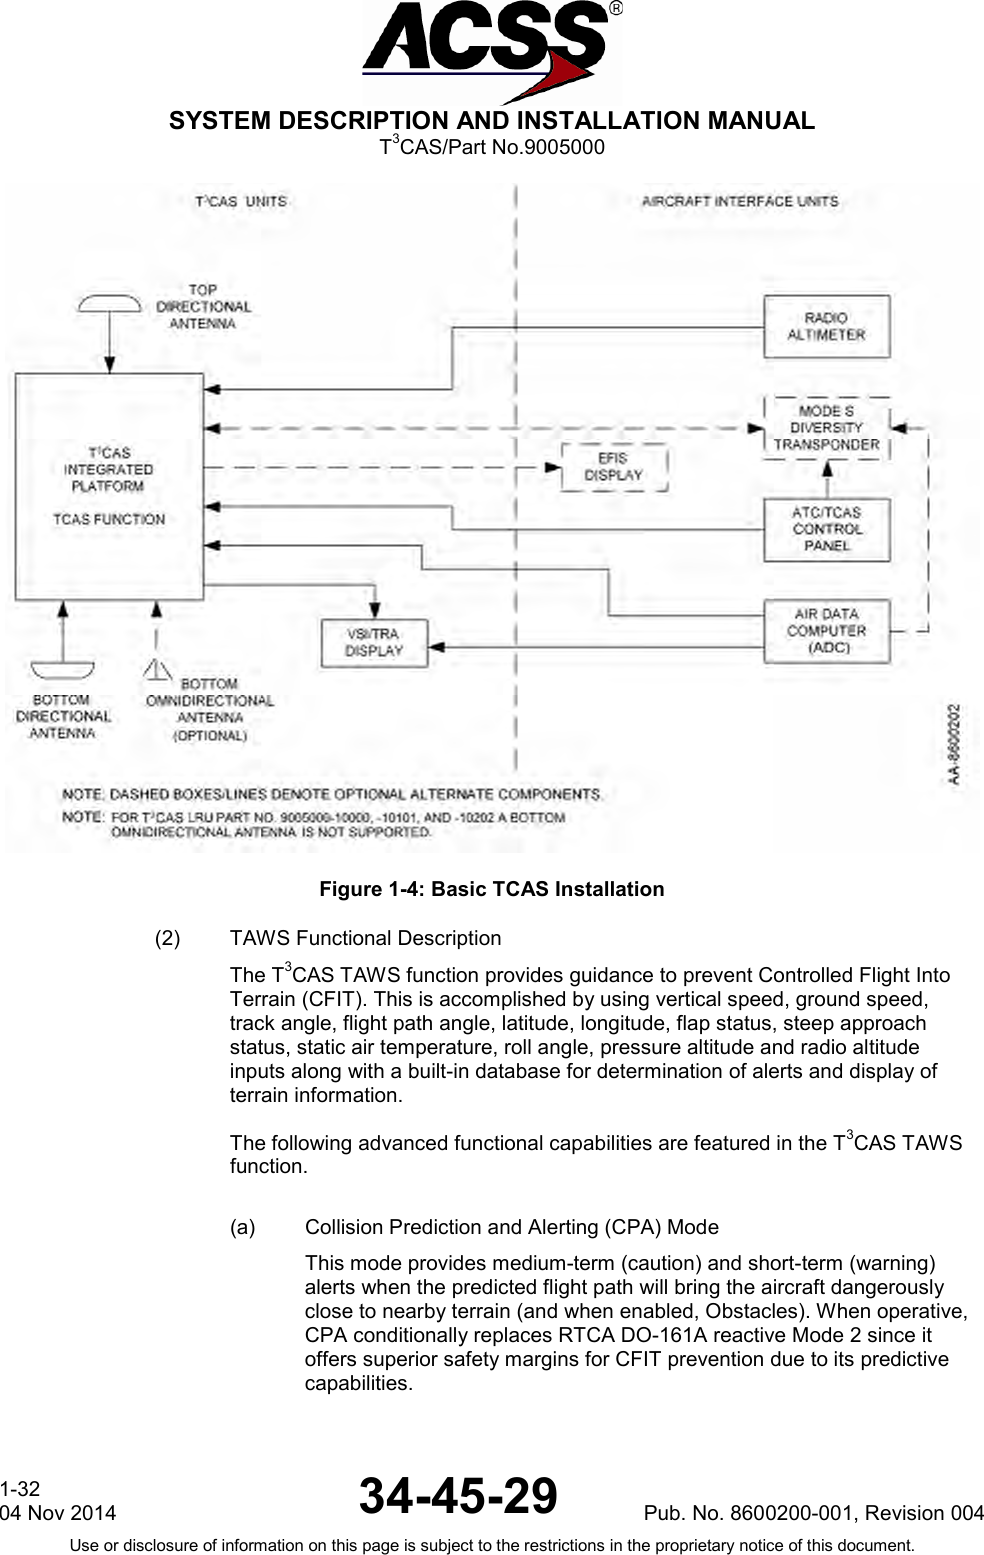  SYSTEM DESCRIPTION AND INSTALLATION MANUAL T3CAS/Part No.9005000  Figure 1-4: Basic TCAS Installation (2) TAWS Functional Description The T3CAS TAWS function provides guidance to prevent Controlled Flight Into Terrain (CFIT). This is accomplished by using vertical speed, ground speed, track angle, flight path angle, latitude, longitude, flap status, steep approach status, static air temperature, roll angle, pressure altitude and radio altitude inputs along with a built-in database for determination of alerts and display of terrain information.  The following advanced functional capabilities are featured in the T3CAS TAWS function.  (a) Collision Prediction and Alerting (CPA) Mode This mode provides medium-term (caution) and short-term (warning) alerts when the predicted flight path will bring the aircraft dangerously close to nearby terrain (and when enabled, Obstacles). When operative, CPA conditionally replaces RTCA DO-161A reactive Mode 2 since it offers superior safety margins for CFIT prevention due to its predictive capabilities.  1-32 04 Nov 2014 34-45-29 Pub. No. 8600200-001, Revision 004 Use or disclosure of information on this page is subject to the restrictions in the proprietary notice of this document.  